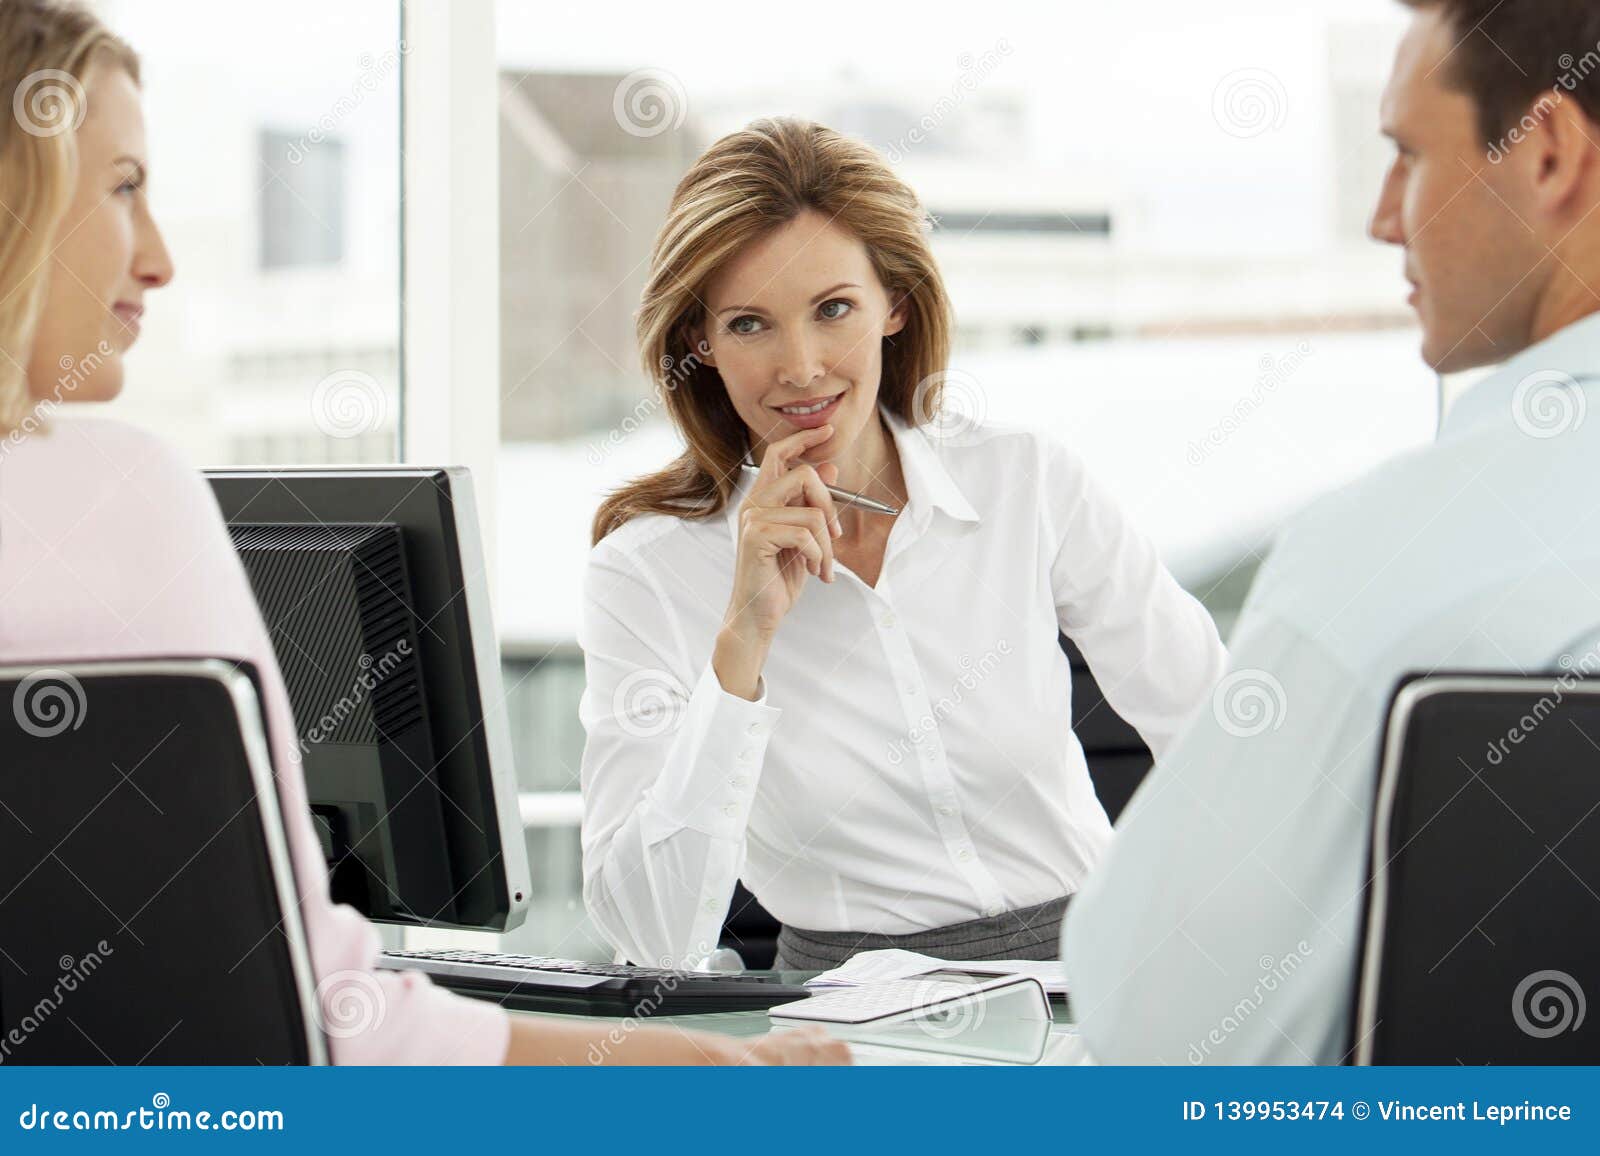 financial advisor with couple at meeting in office - lawyer providing advice to man and woman - real estate agent with clients